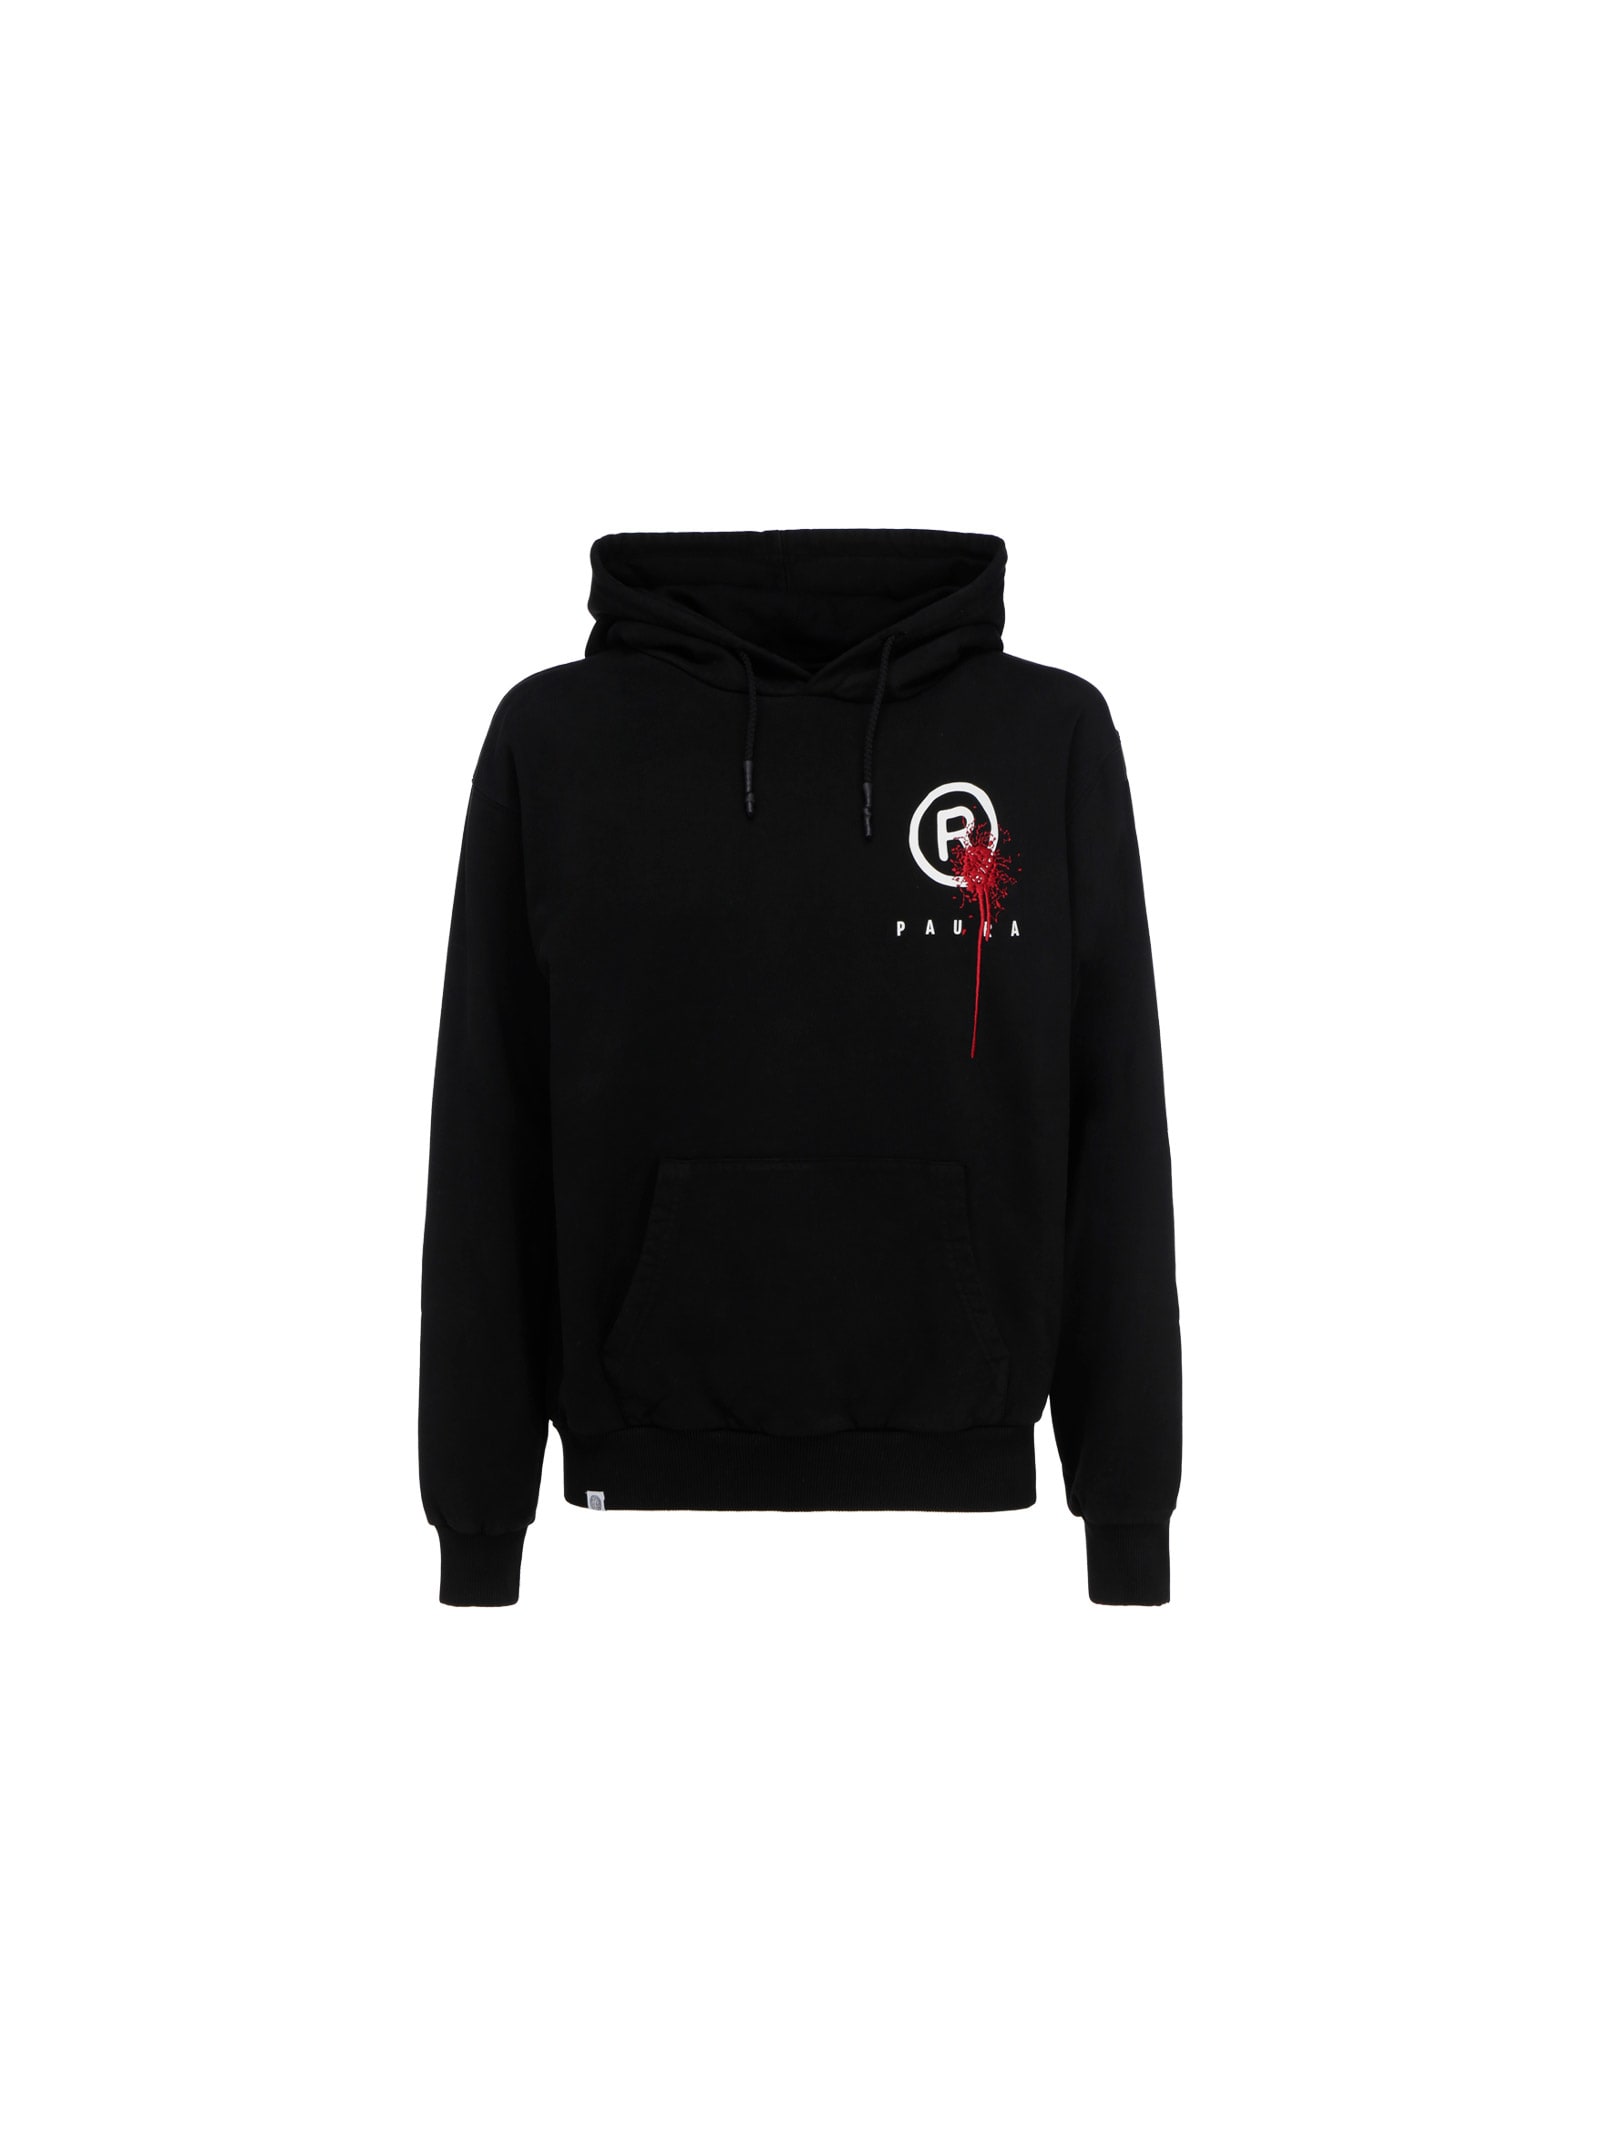 Nothing to Fear Danilo Paura Hoodie